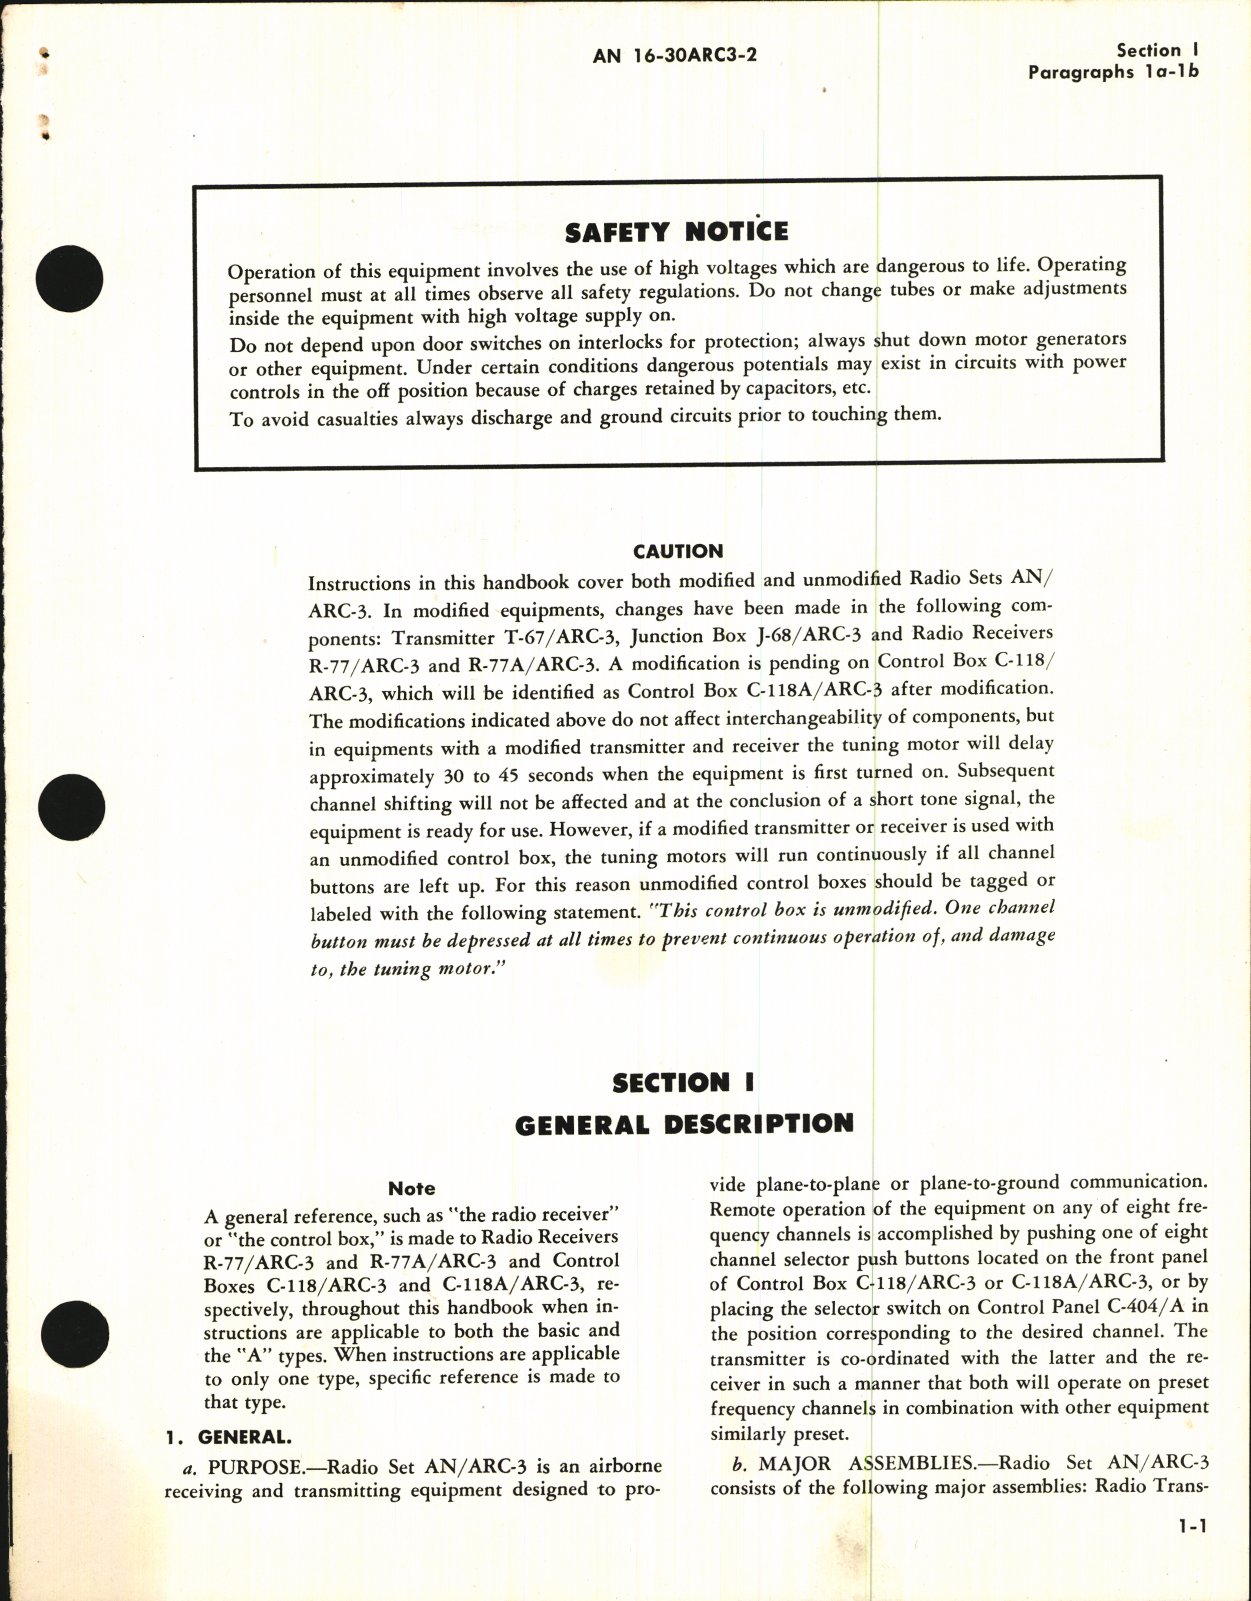 Sample page 5 from AirCorps Library document: Operating Instructions for Radio Set AN/ARC-3